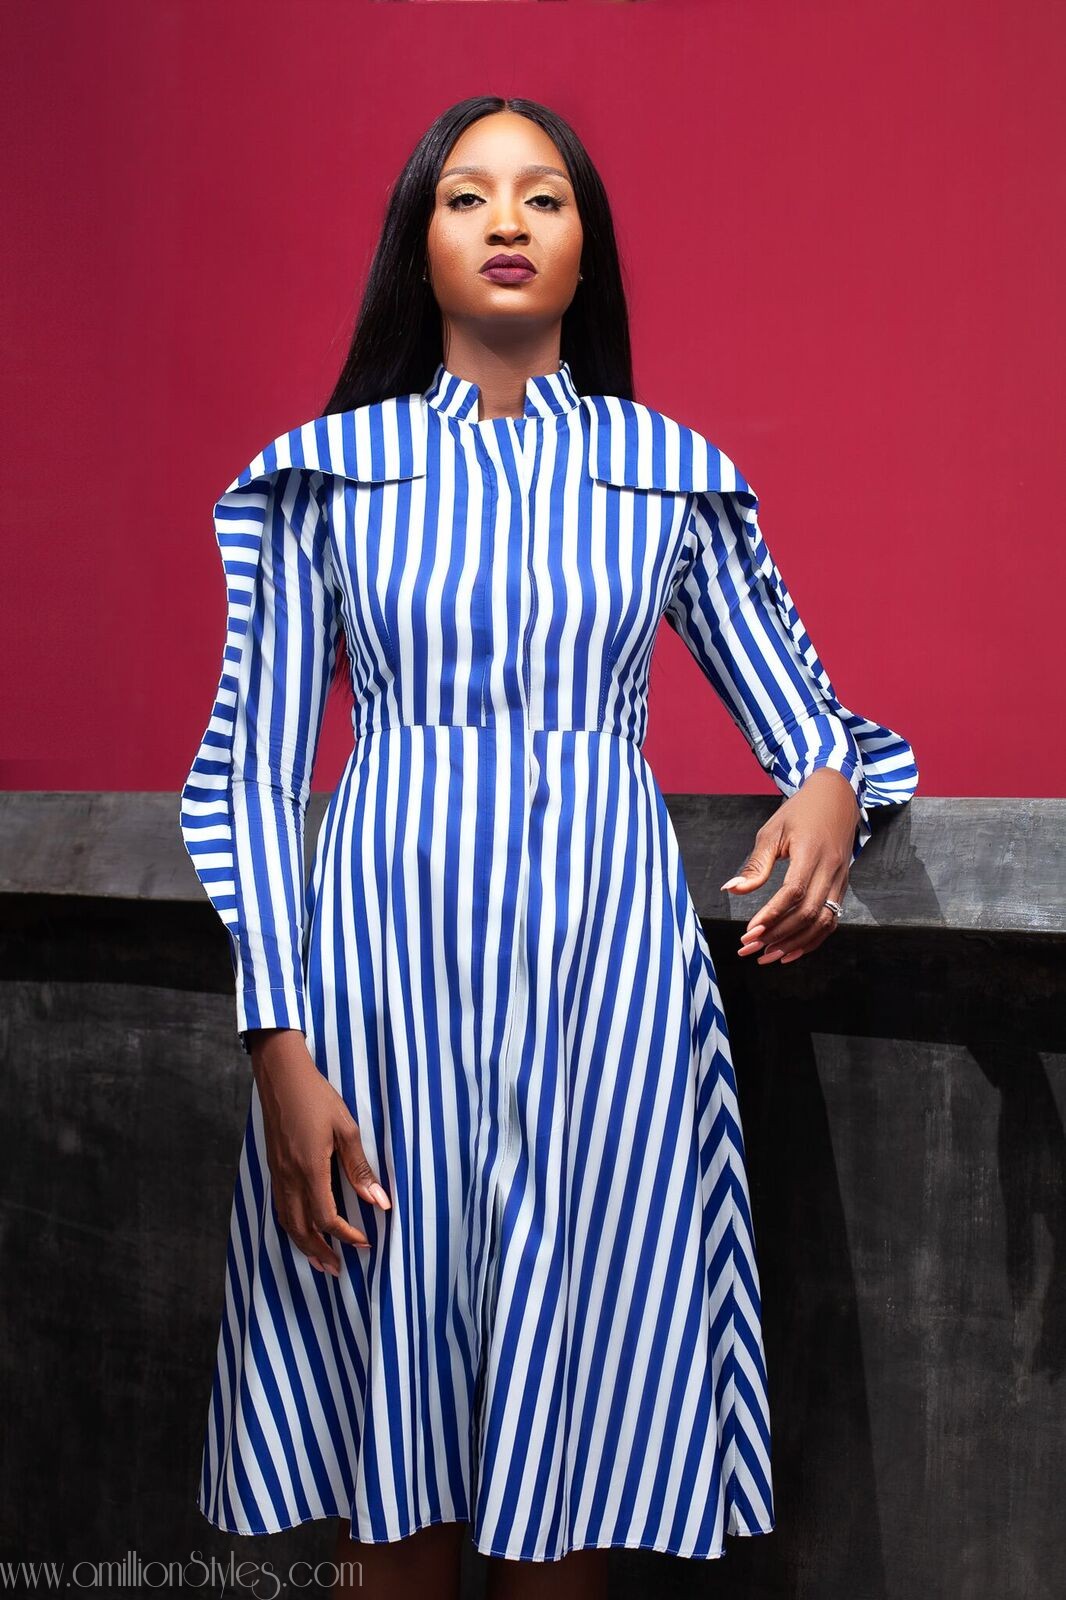 Powede Lawrence Is The Face Of Lady Biba’s “Lady In Line” Campaign